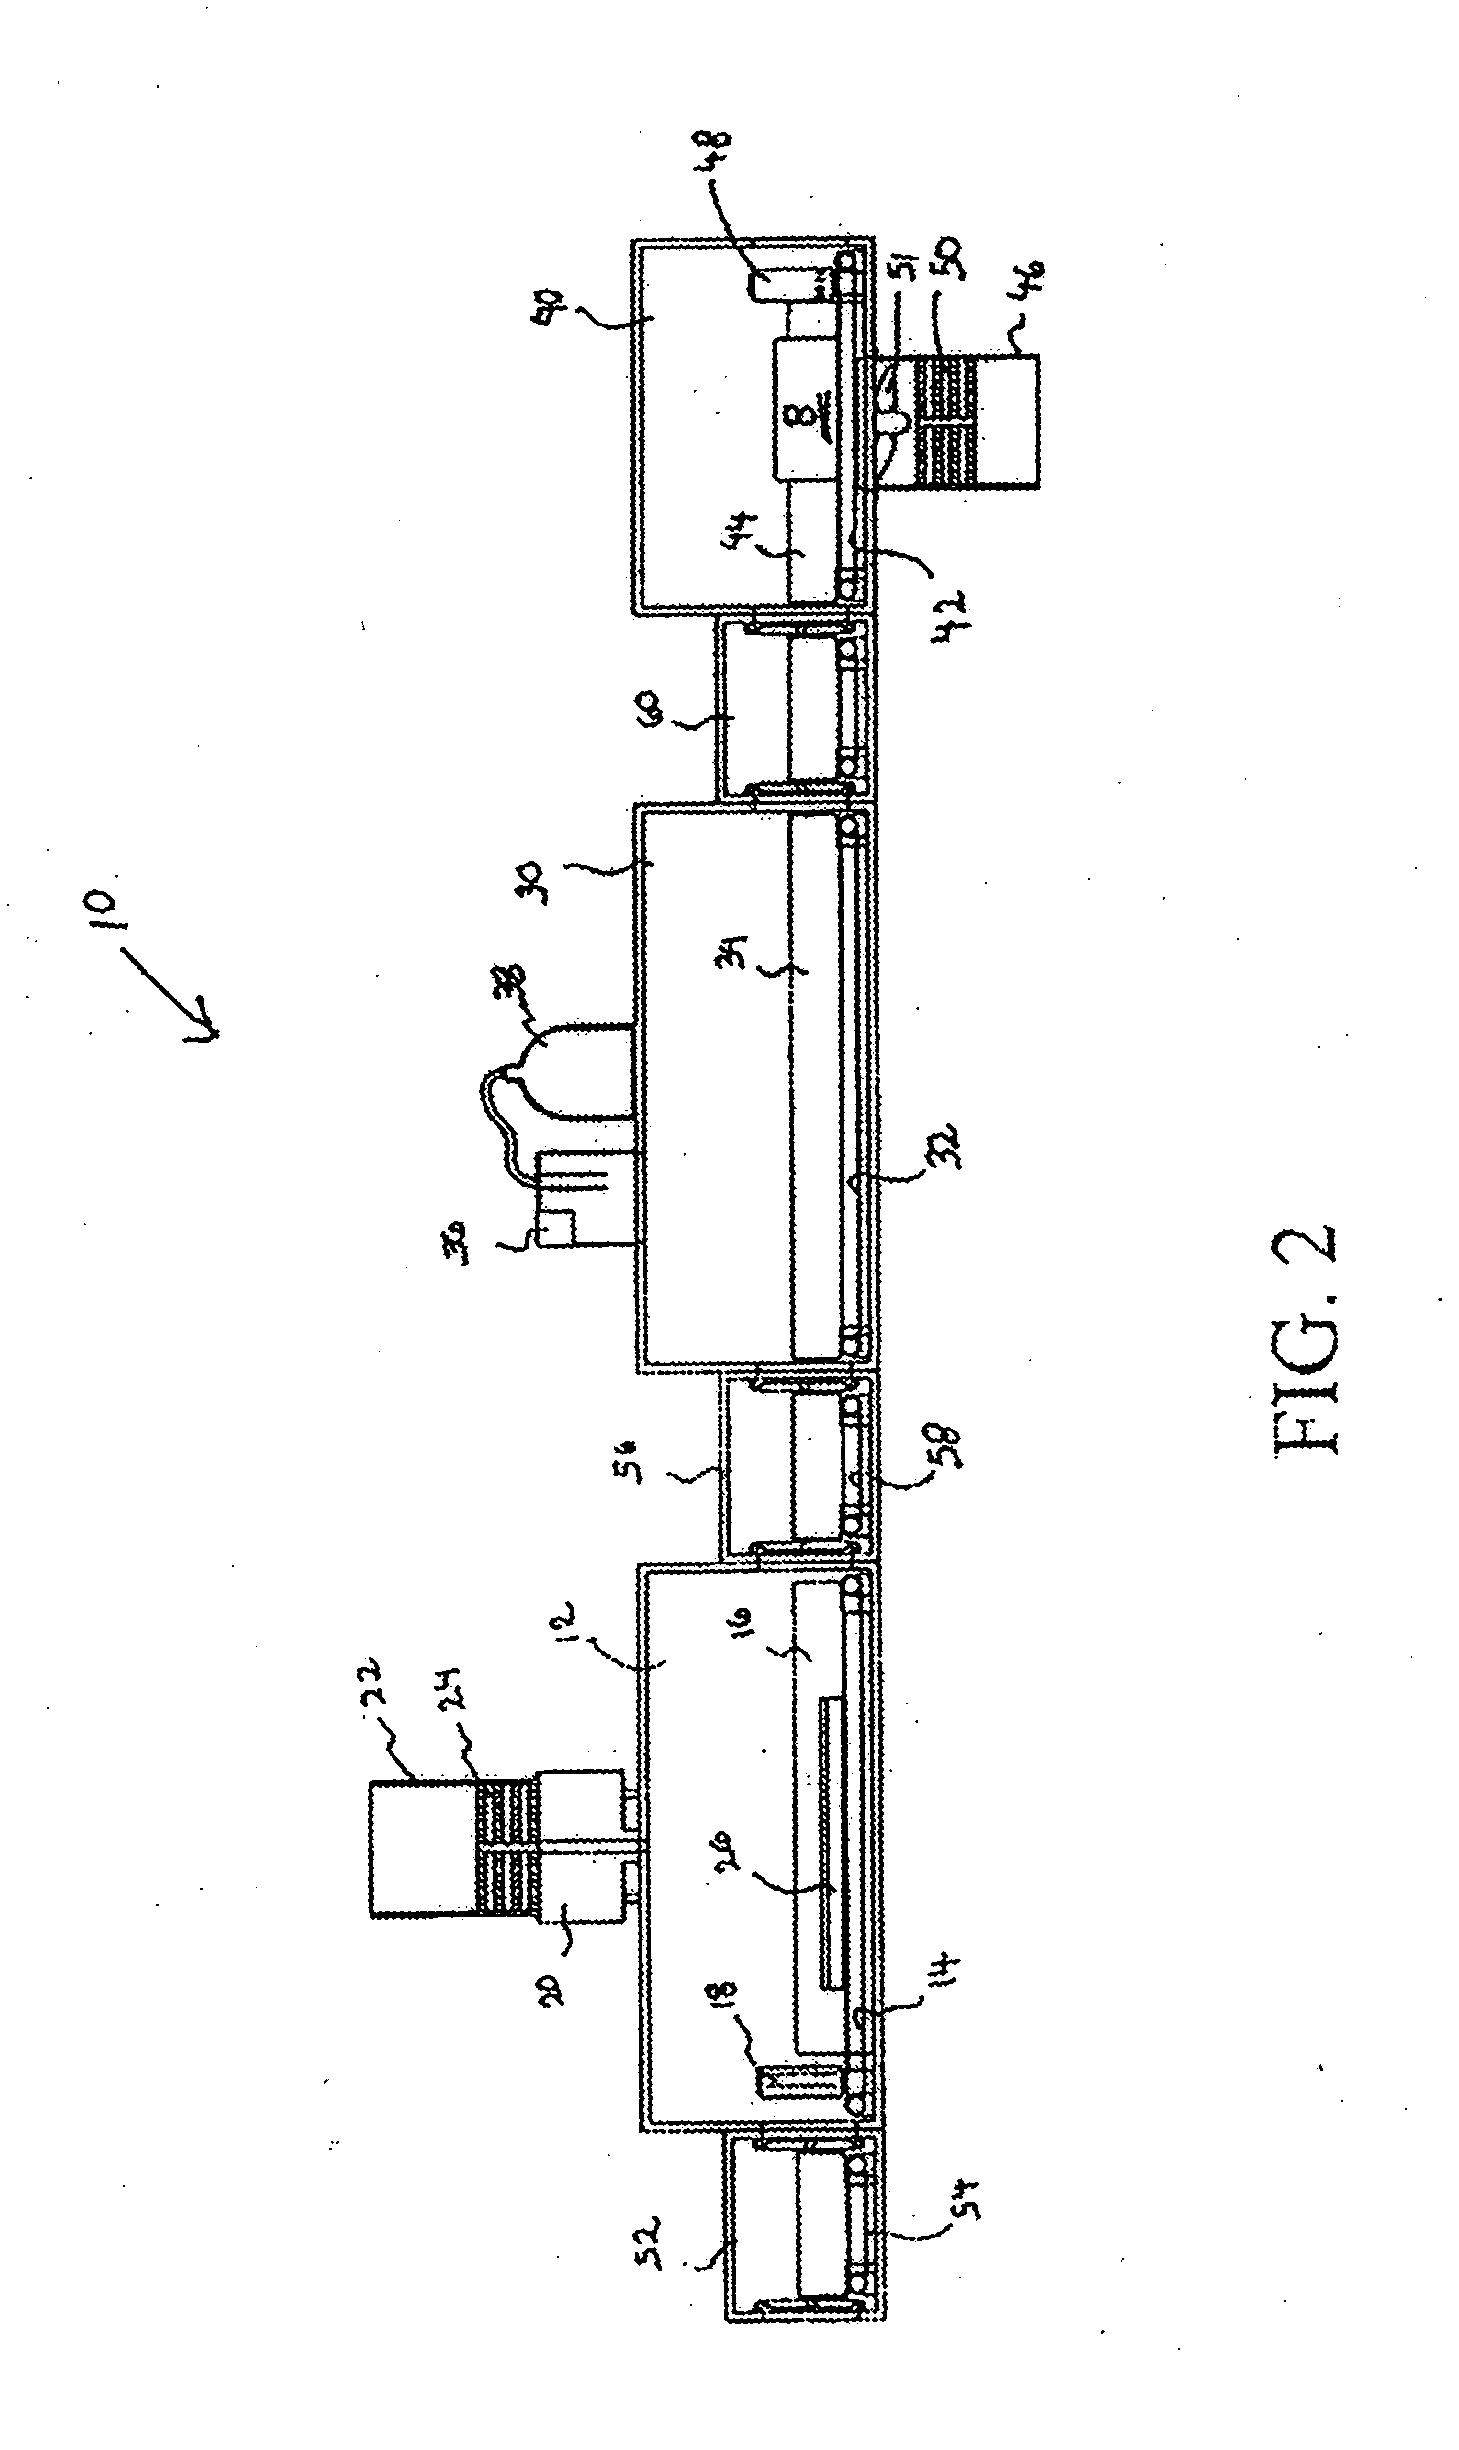 Apparatus for sterilizing mail and textile articles